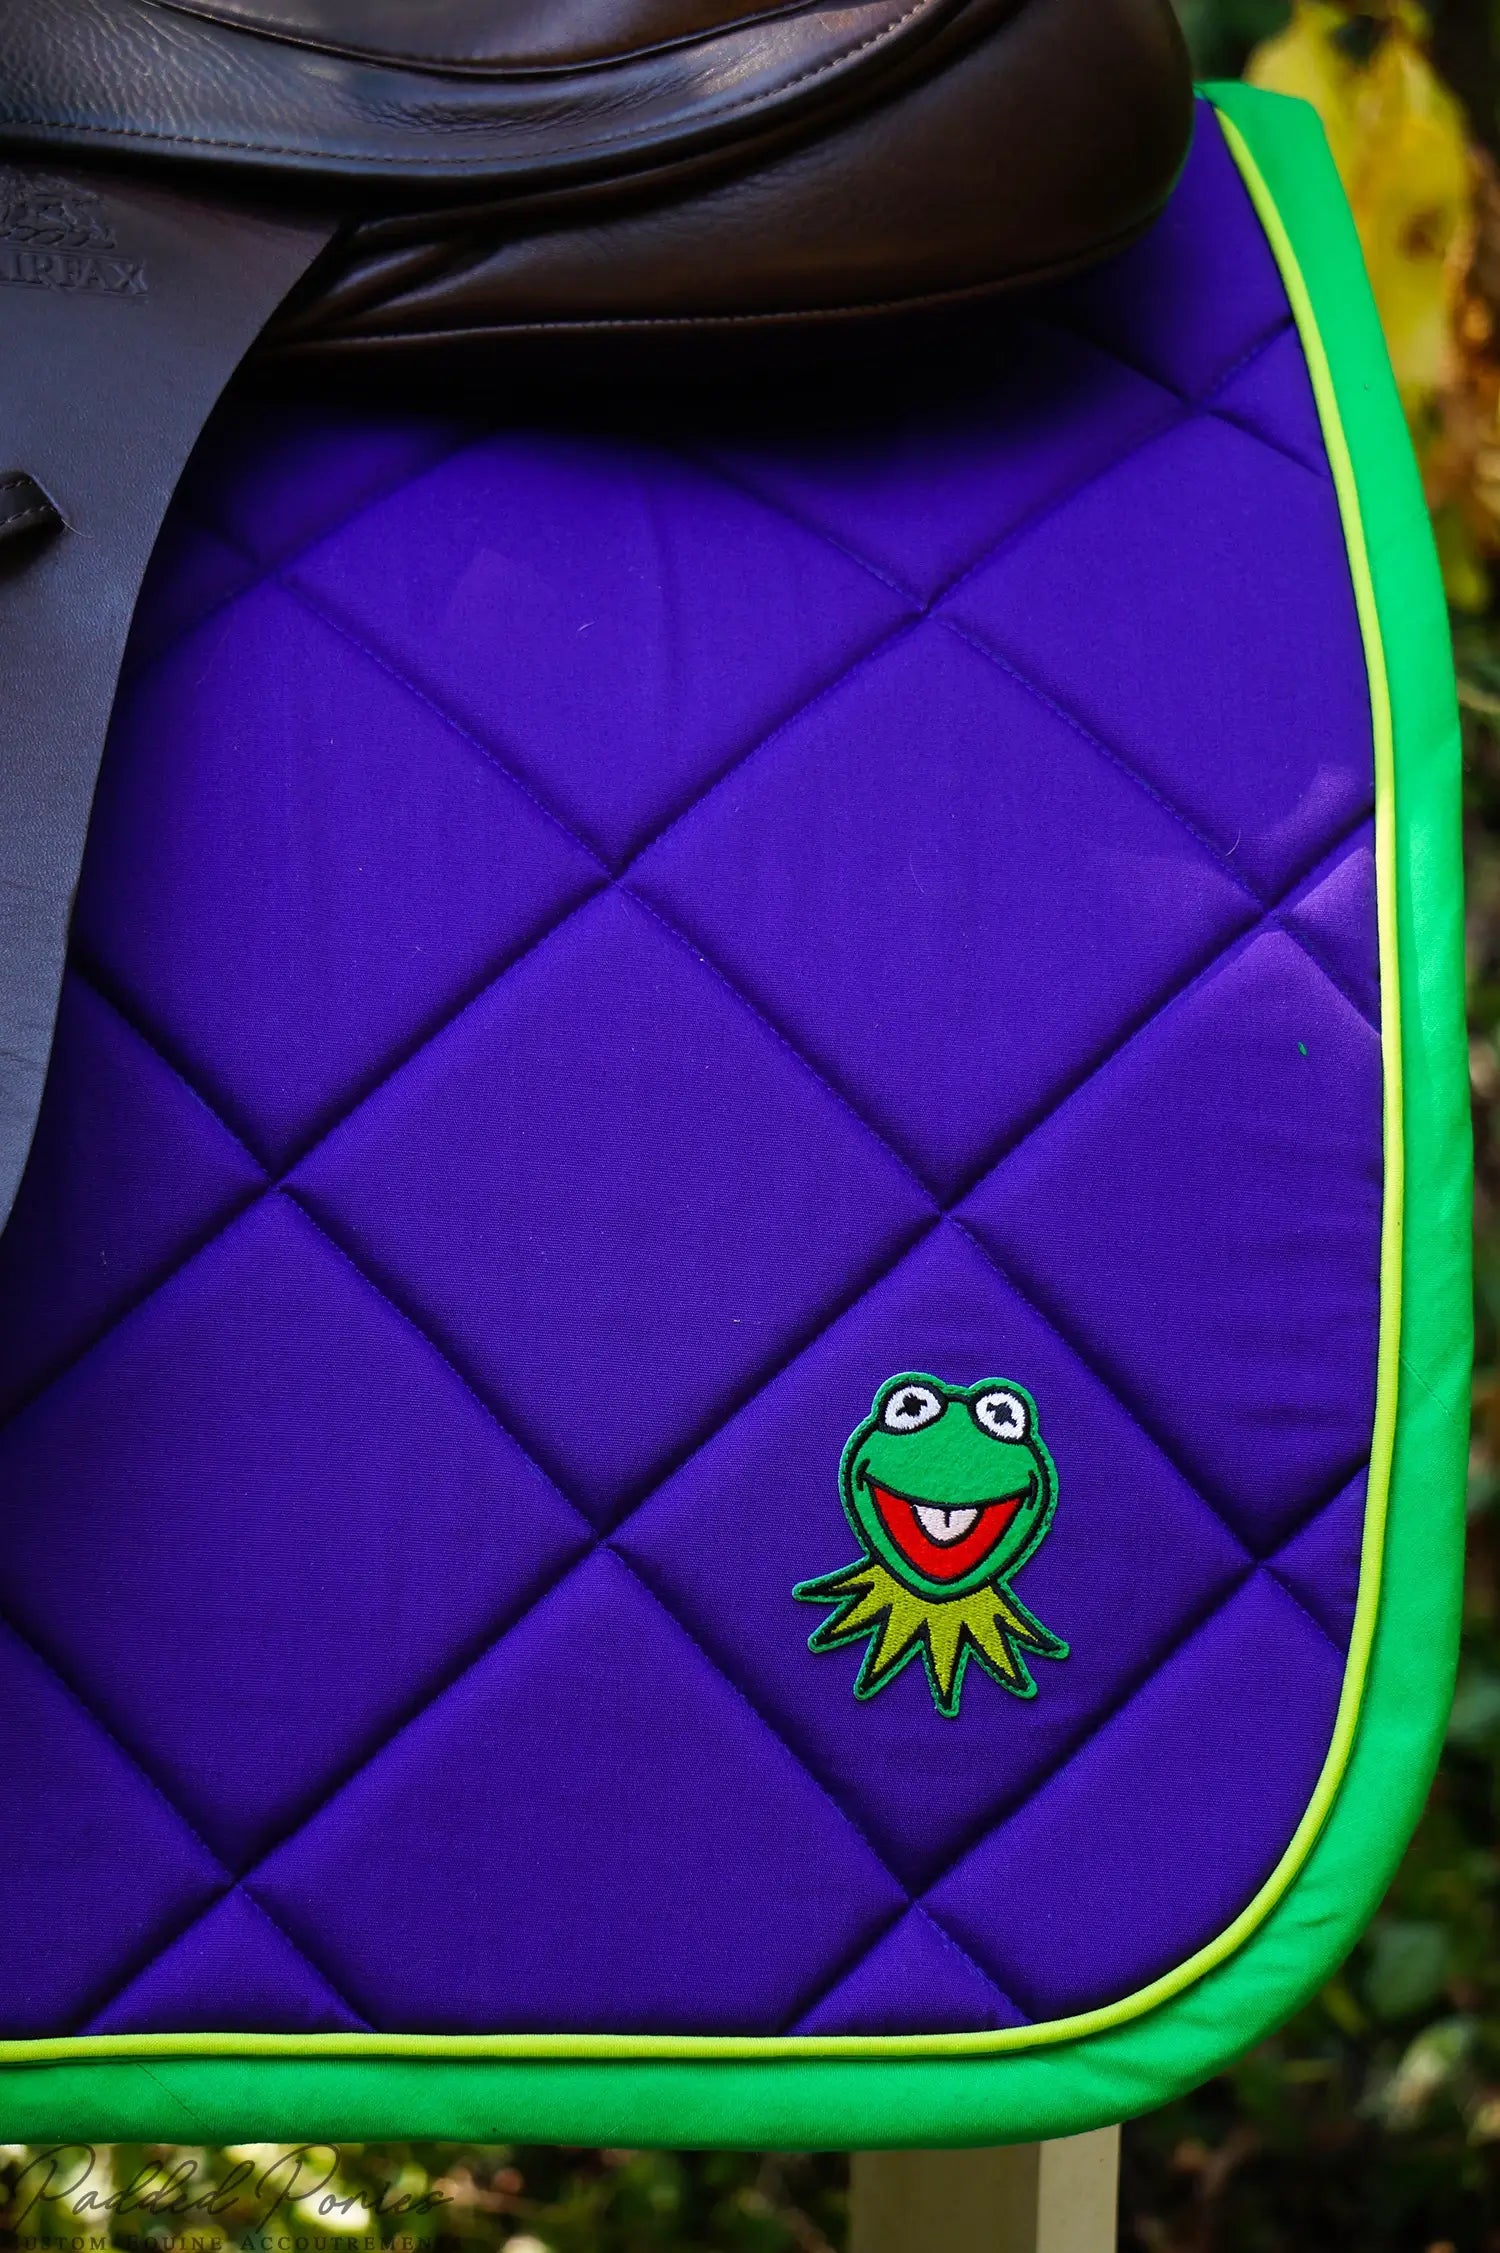 The Muppets Kermit The Frog Patch Purple and Green All Purpose Saddle Pad